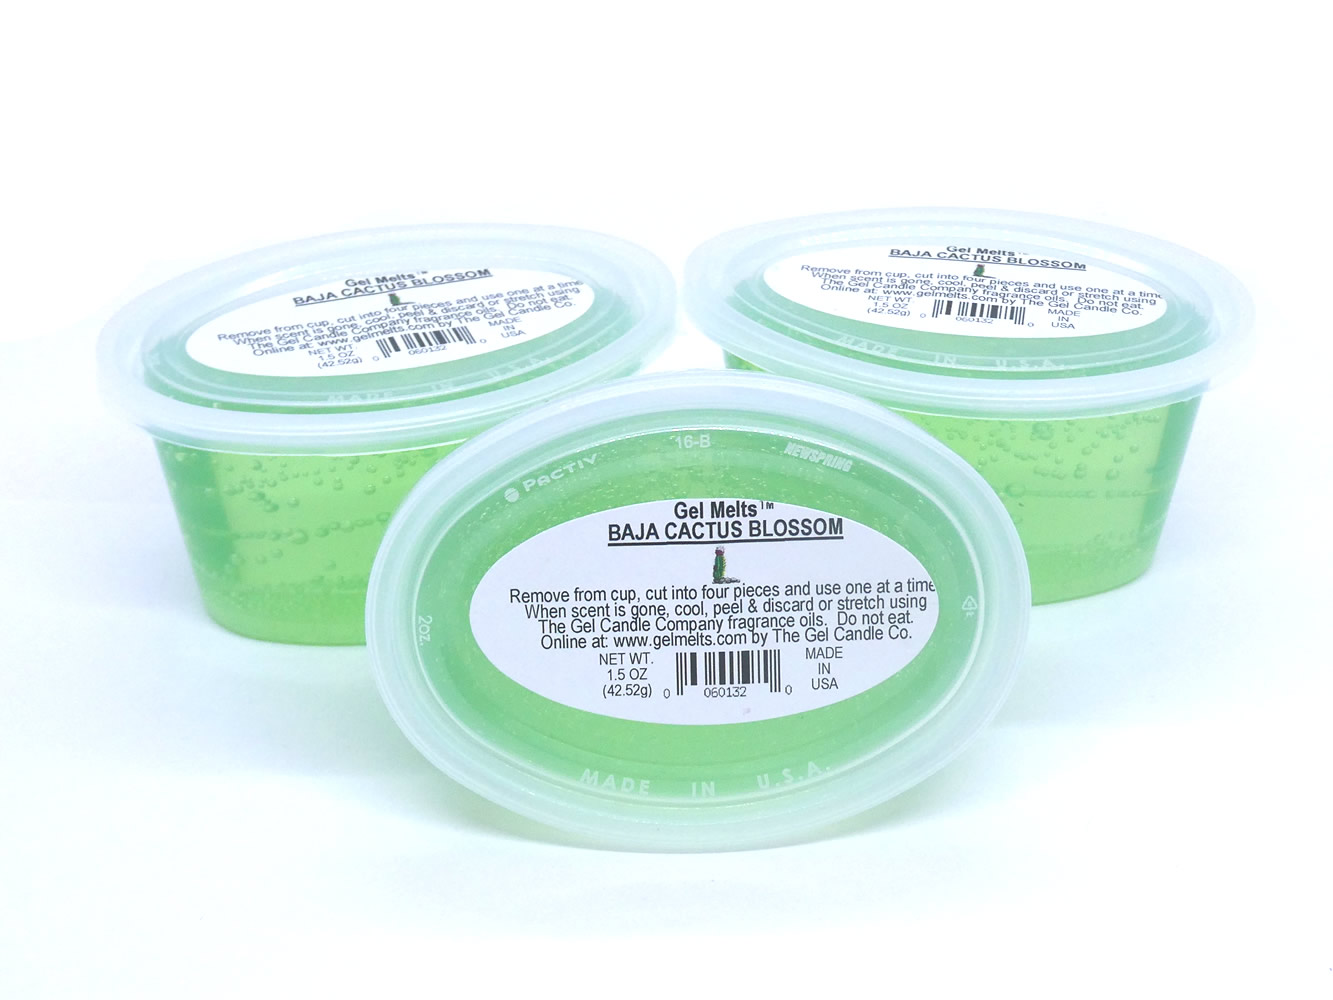 Baja Cactus Blossom scented Gel Melts™ for warmers - 3 pack